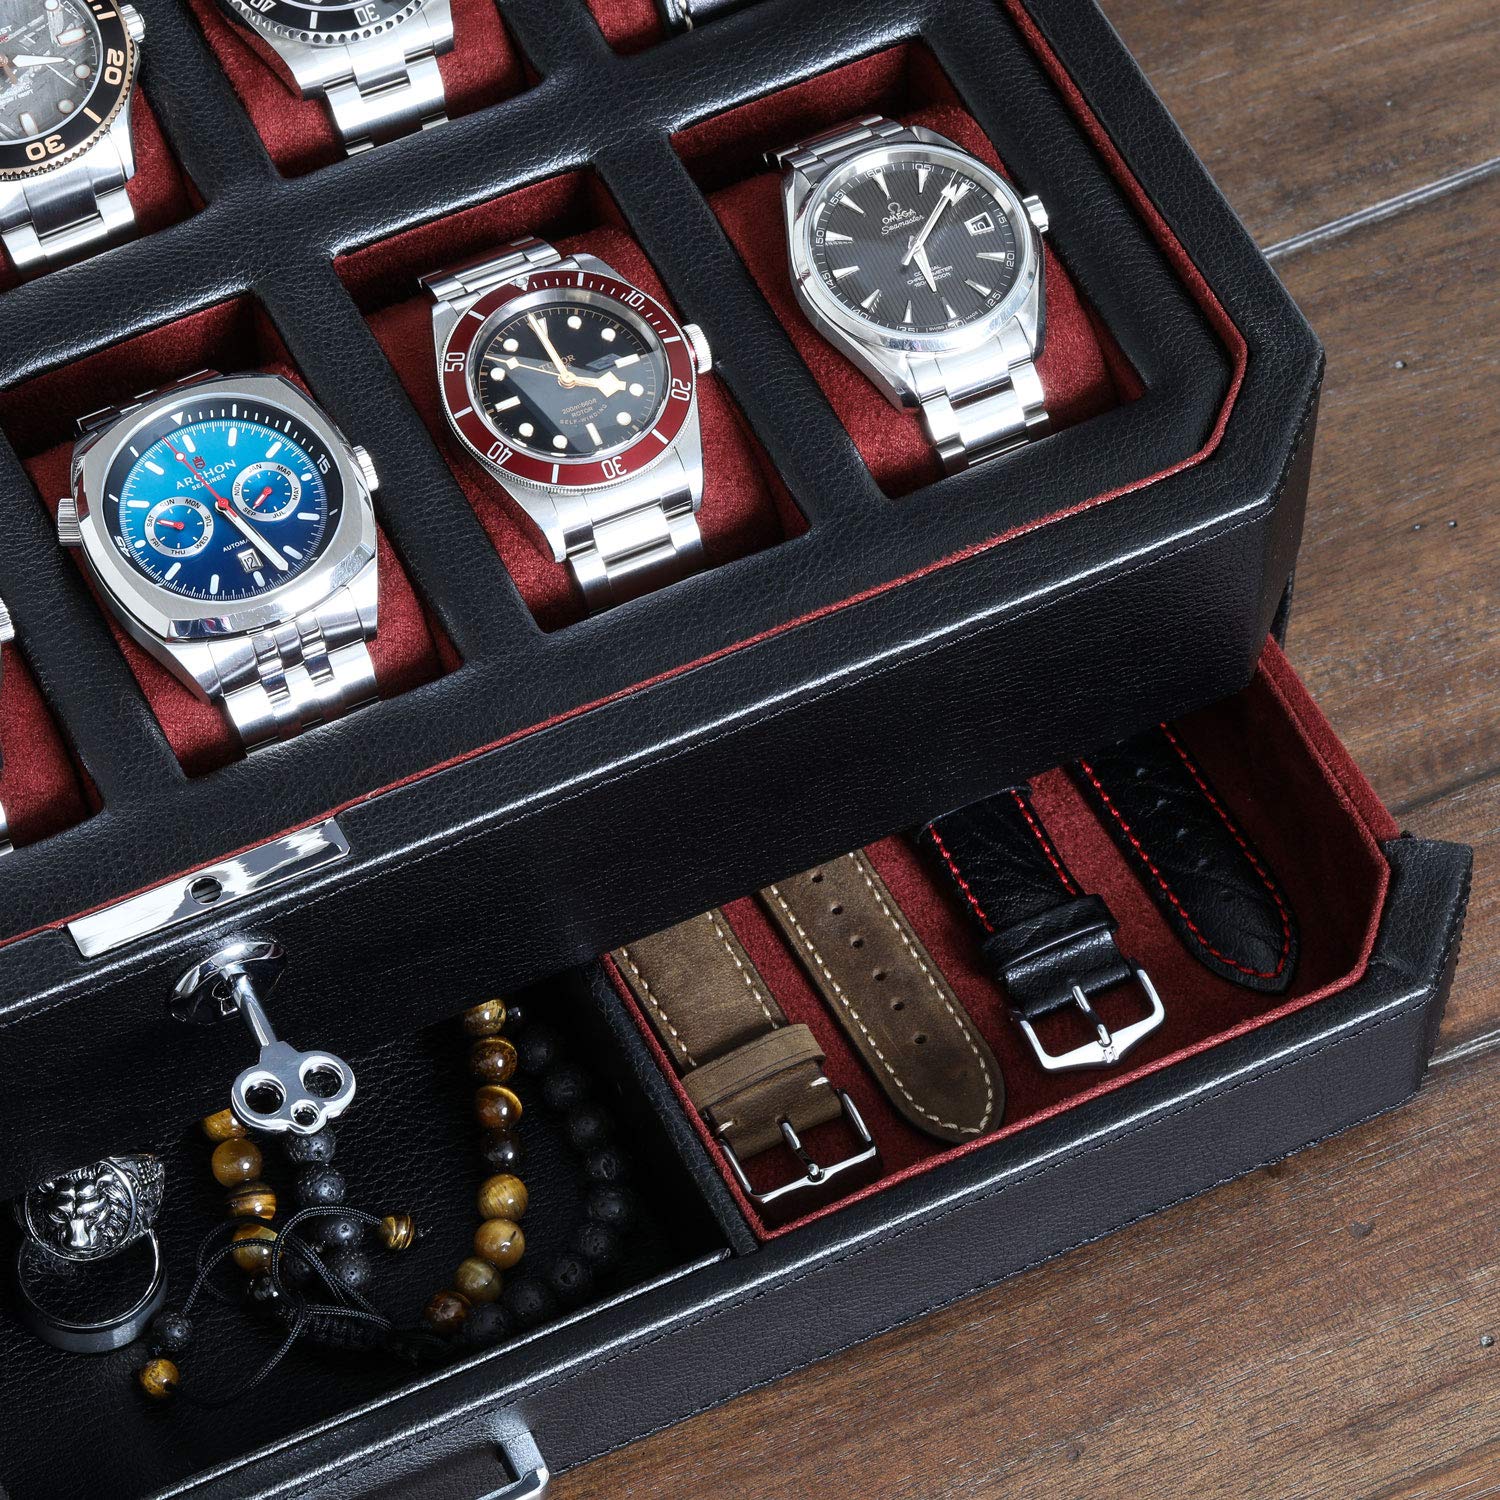 Gift Set 12 Slot Leather Watch Box with Valet Drawer & Matching Double Watch Winder - Luxury Watch Case Display Organizer, Locking Mens Jewelry Watches Holder, Men's Storage Boxes Glass Top Black/Red